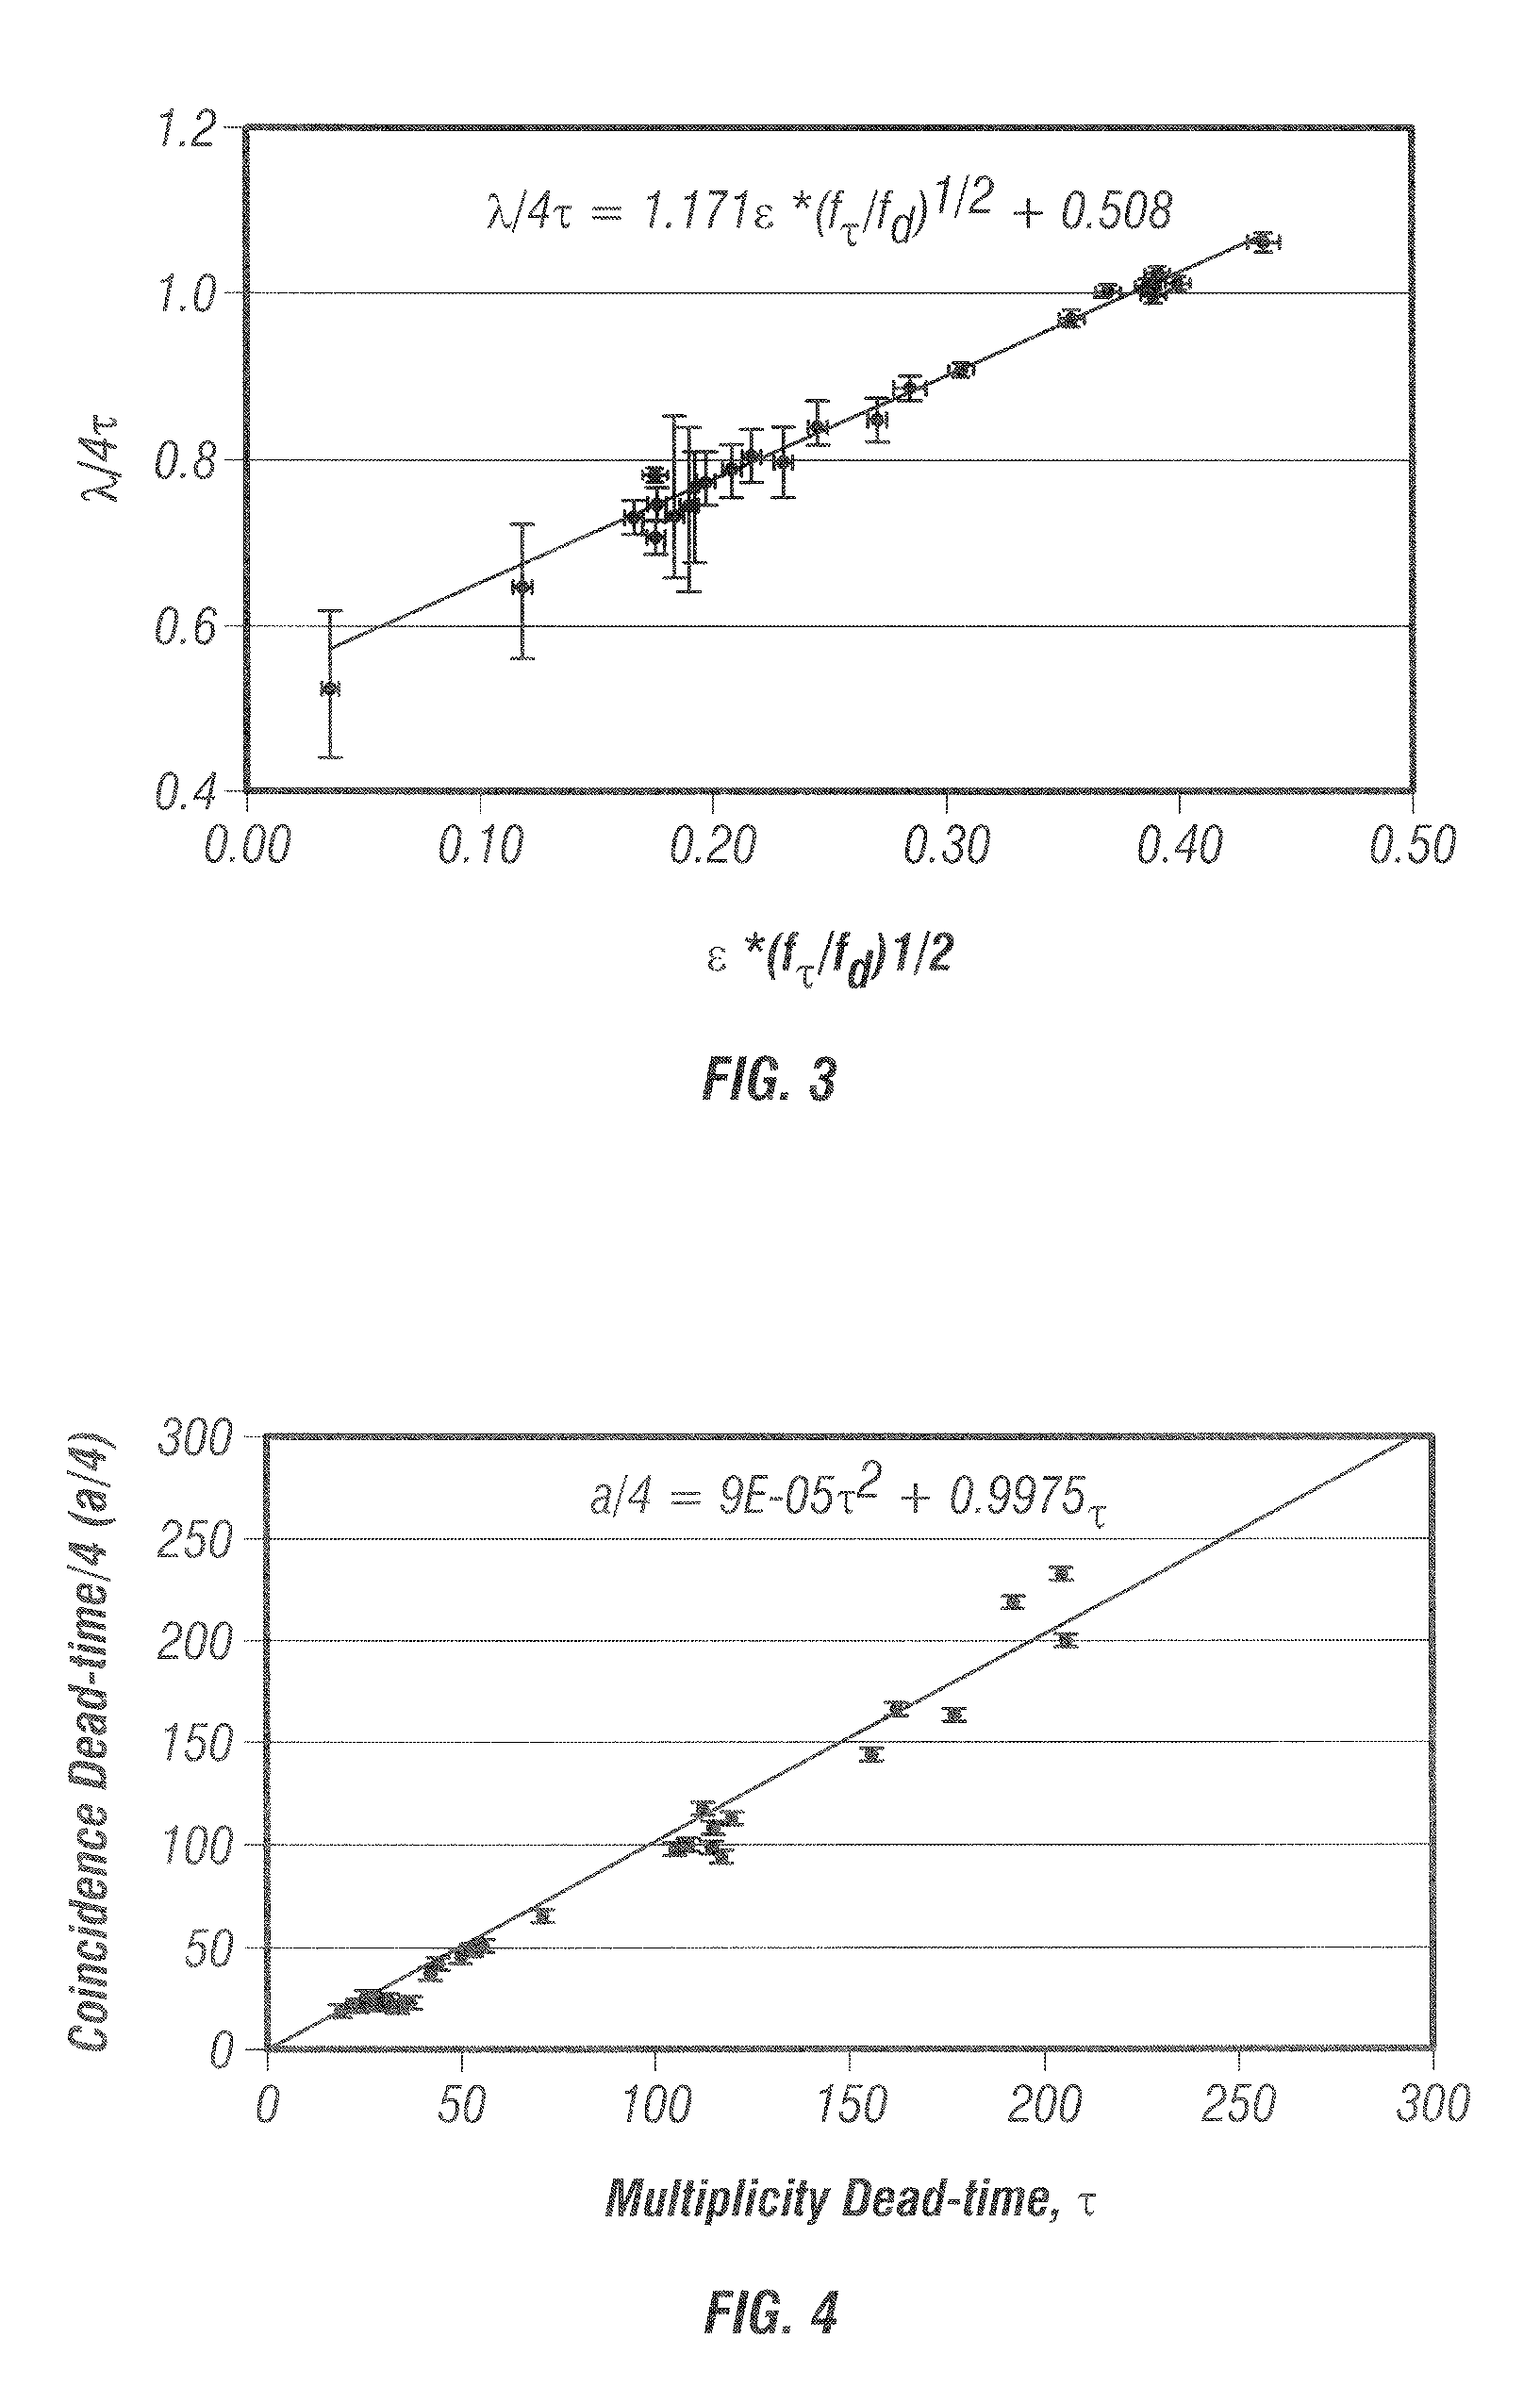 Method for the determination of the neutron multiplicity counter dead time parameter